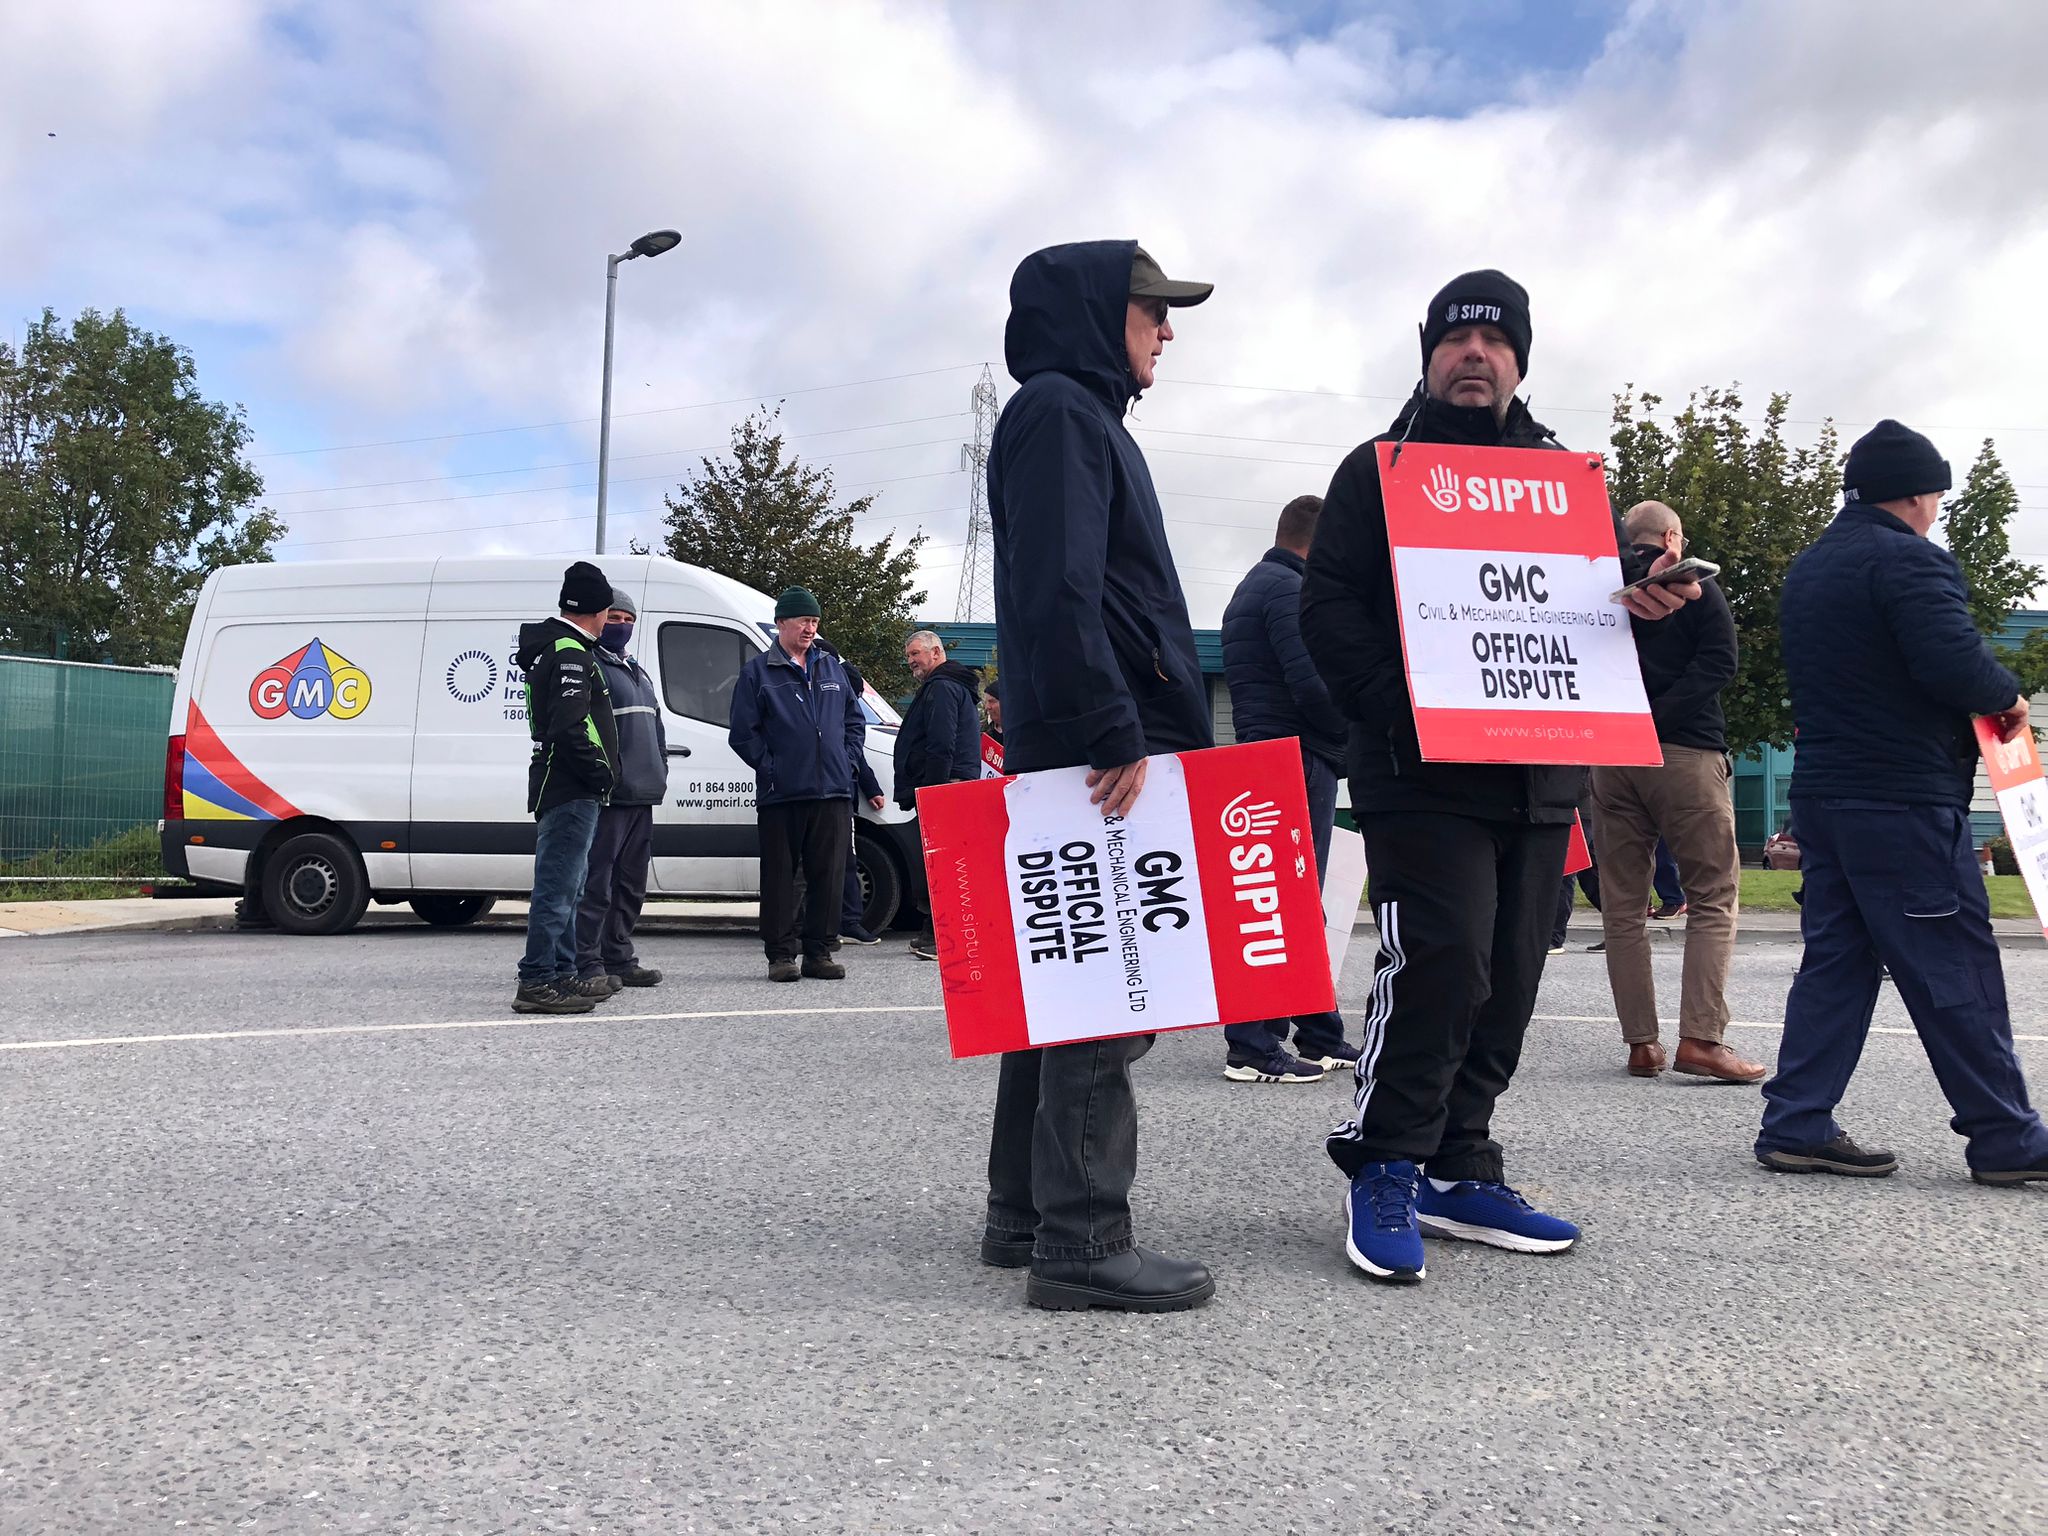 Workers on the GMC Strike Picket